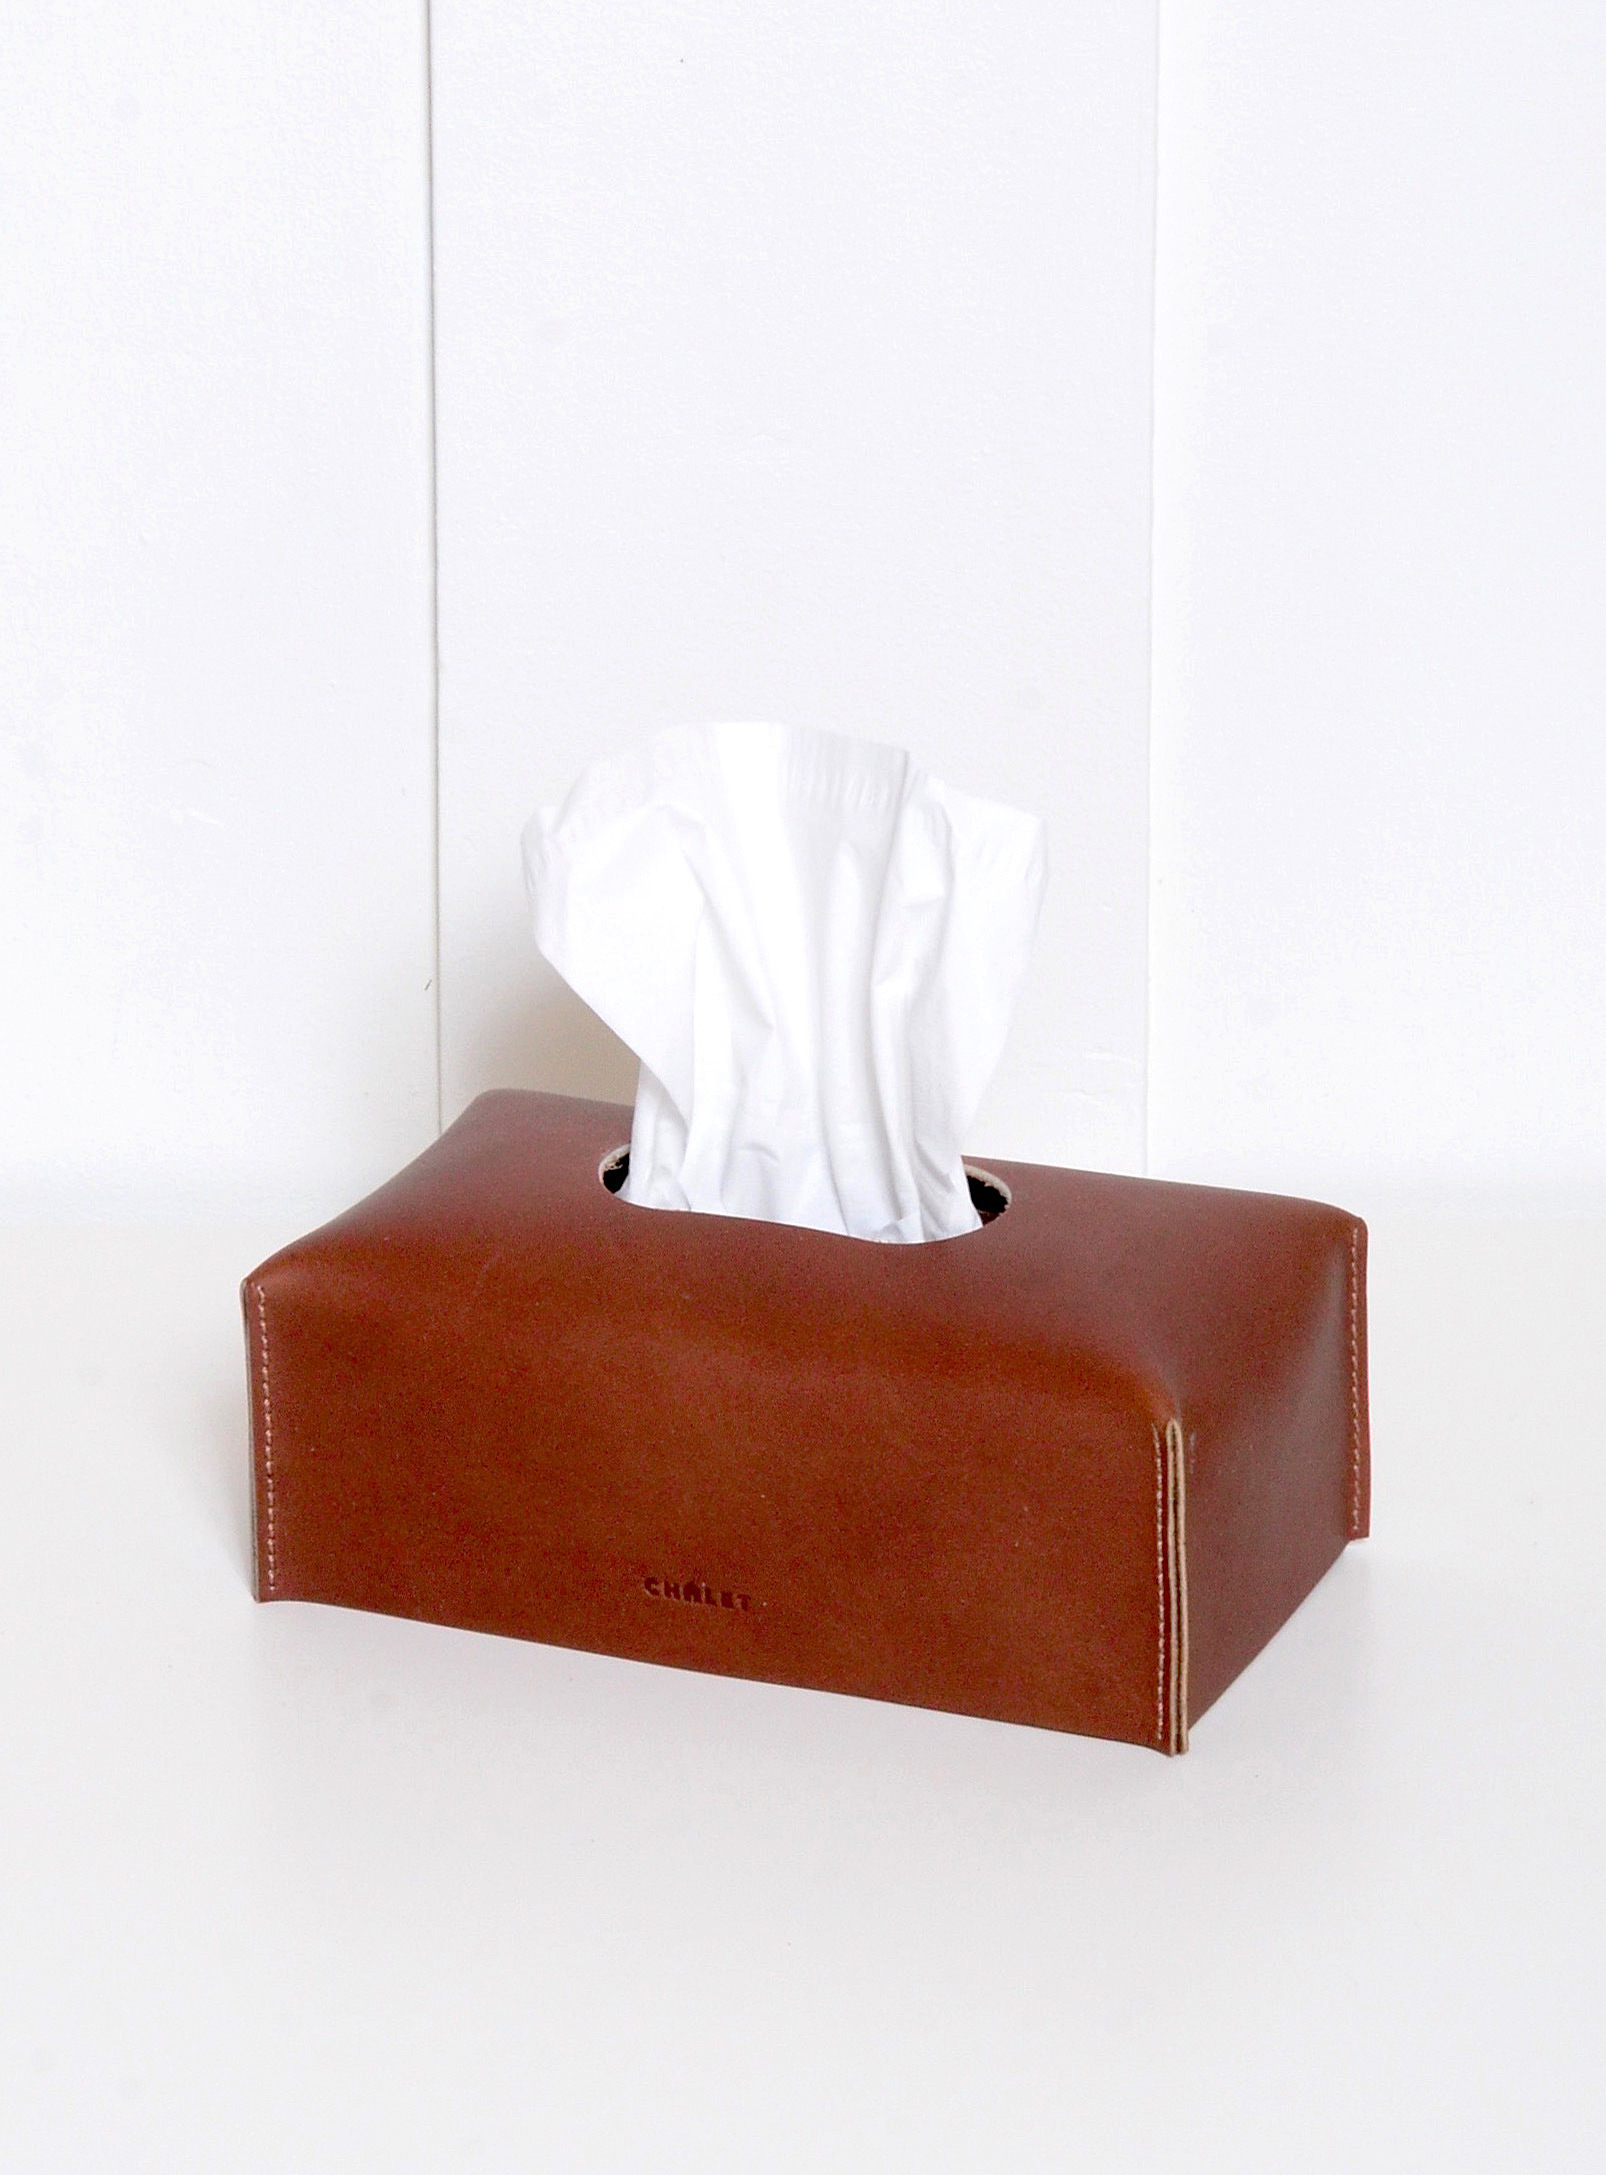 Atelier Chalet Rectangular Leather Tissue Box Cover In Brown